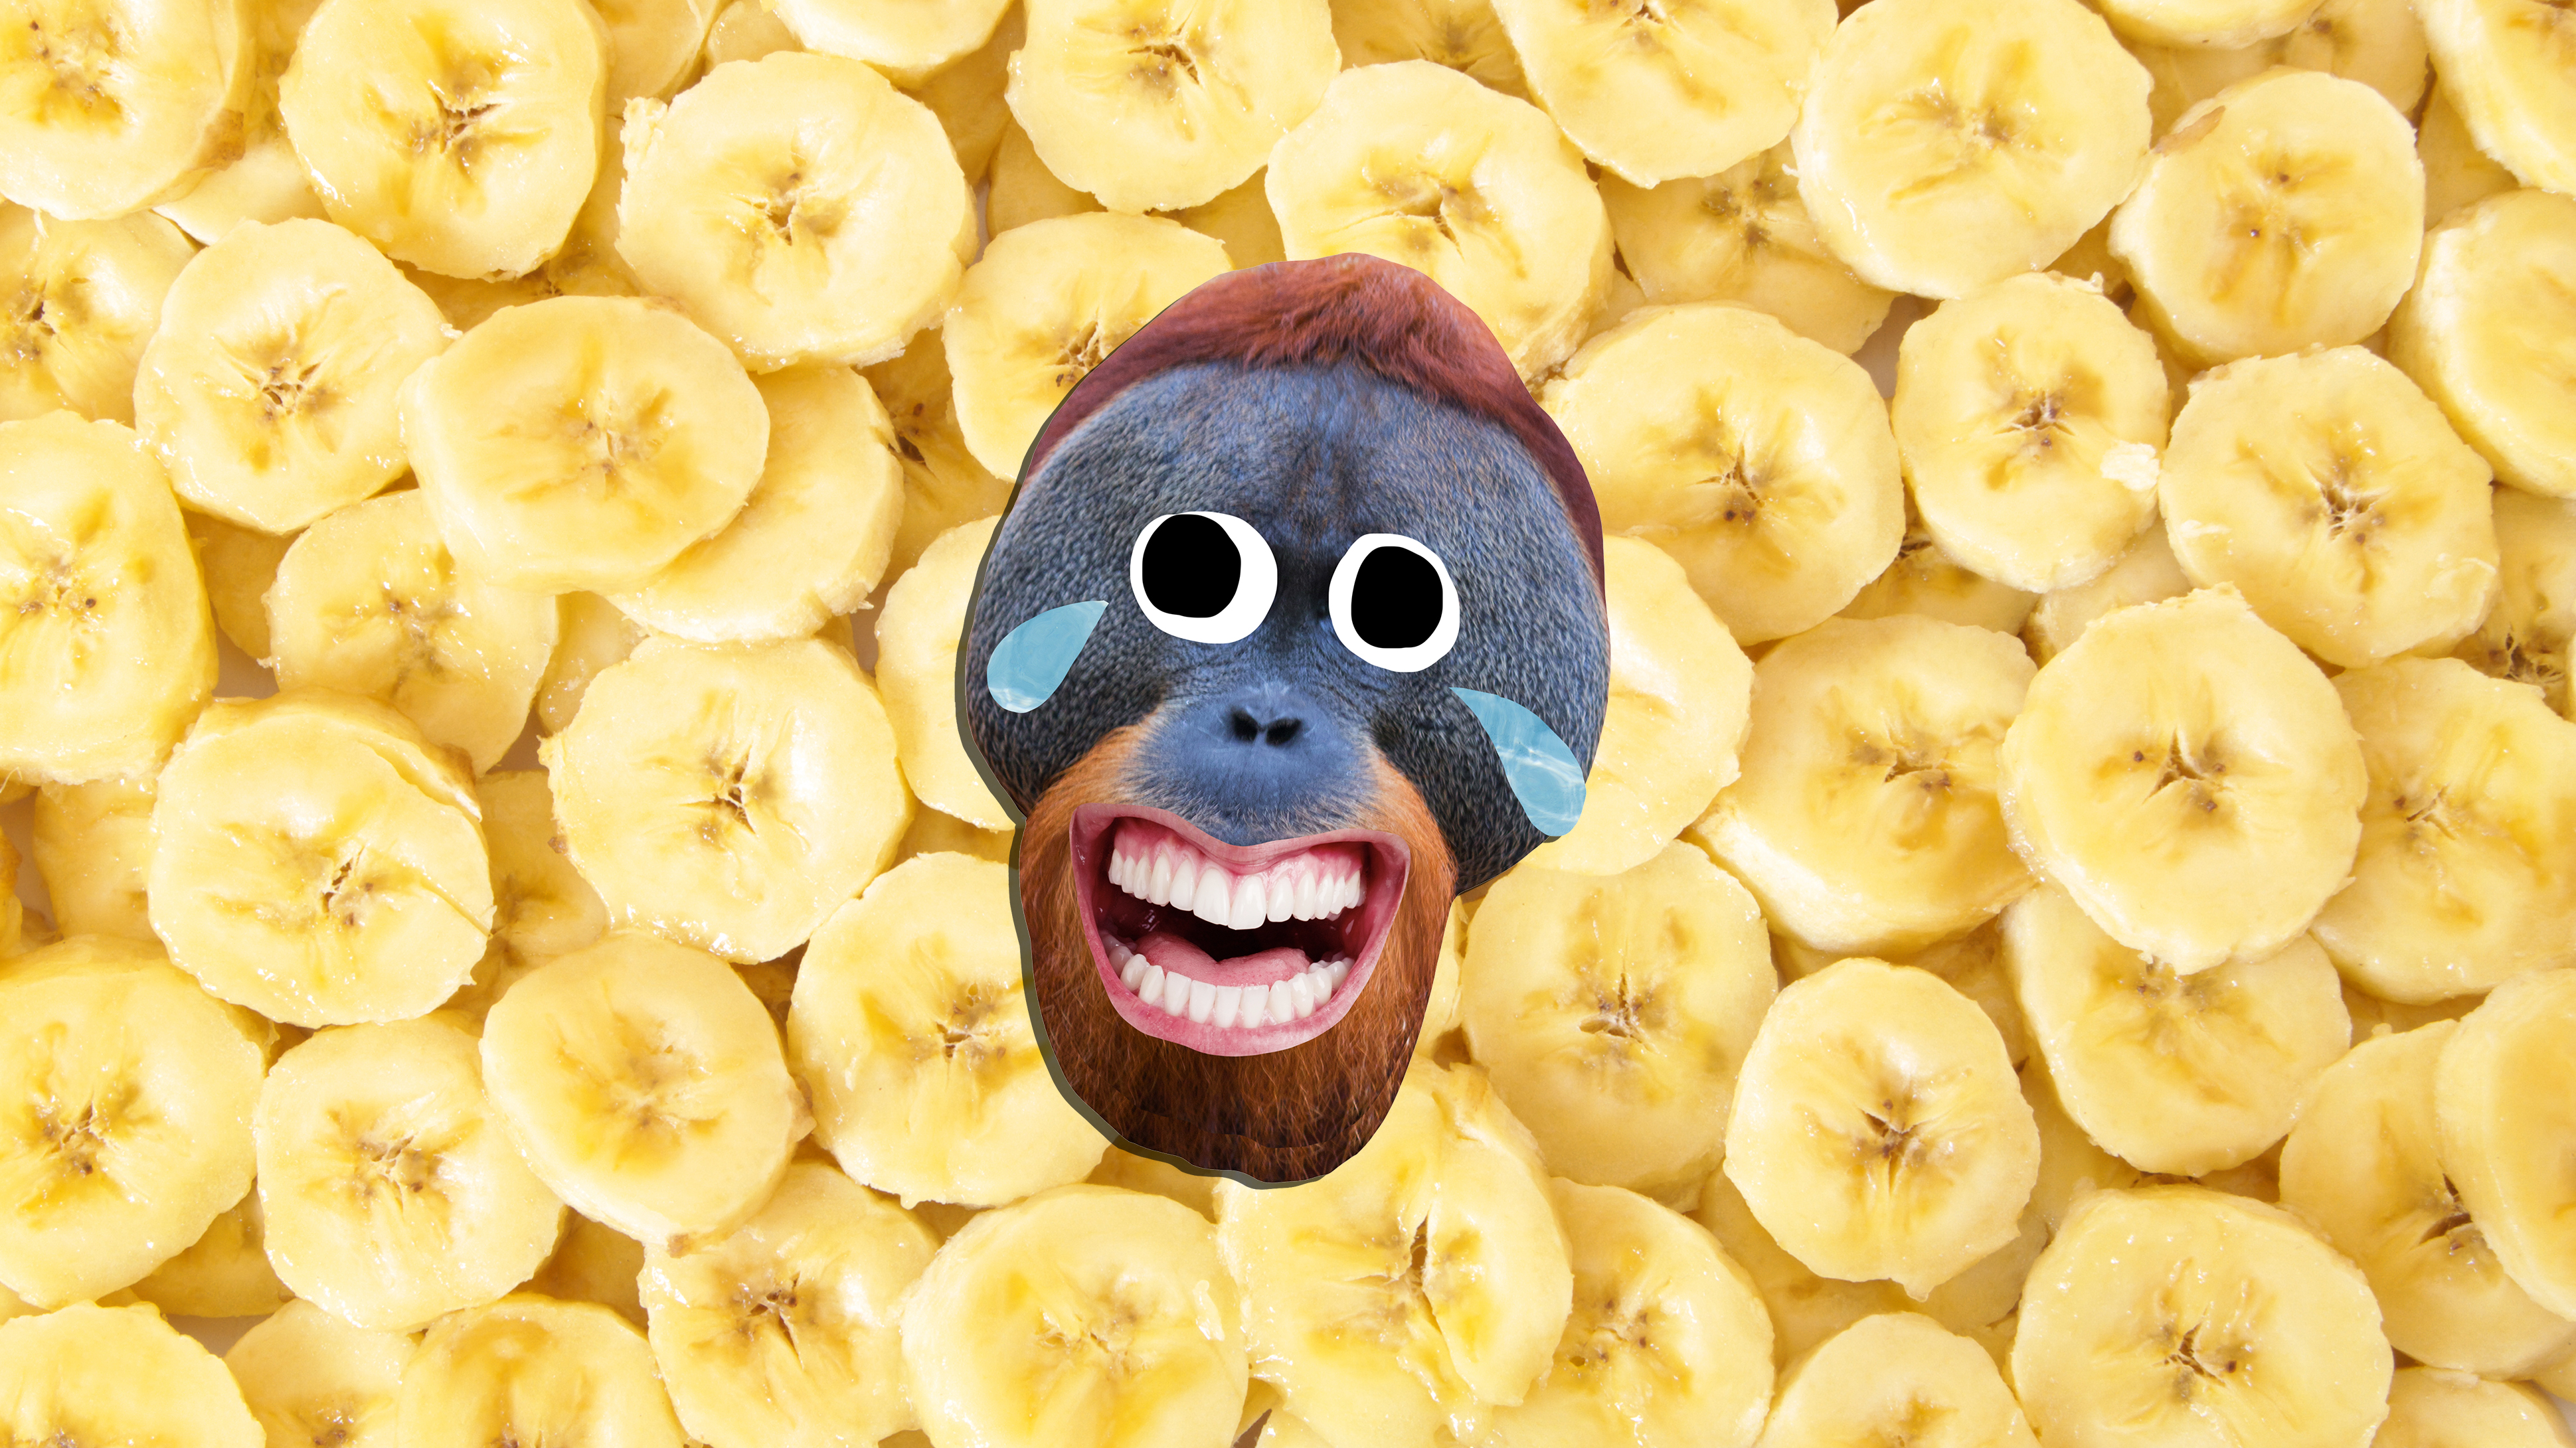 Laughing monkey in front of banana slices